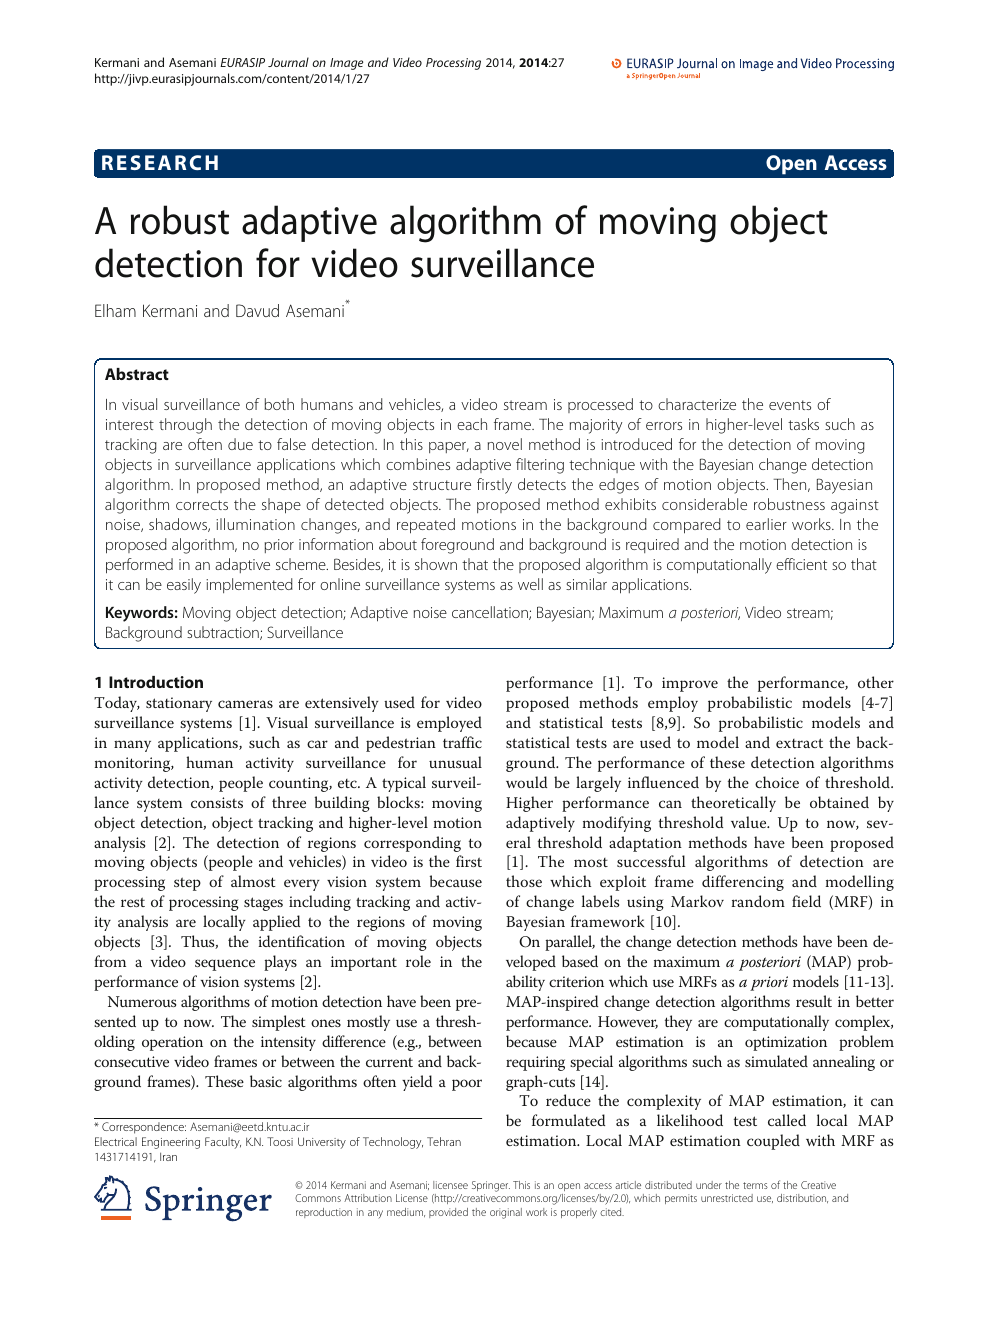 A Robust Adaptive Algorithm Of Moving Object Detection For Video Surveillance Topic Of Research Paper In Medical Engineering Download Scholarly Article Pdf And Read For Free On Cyberleninka Open Science Hub